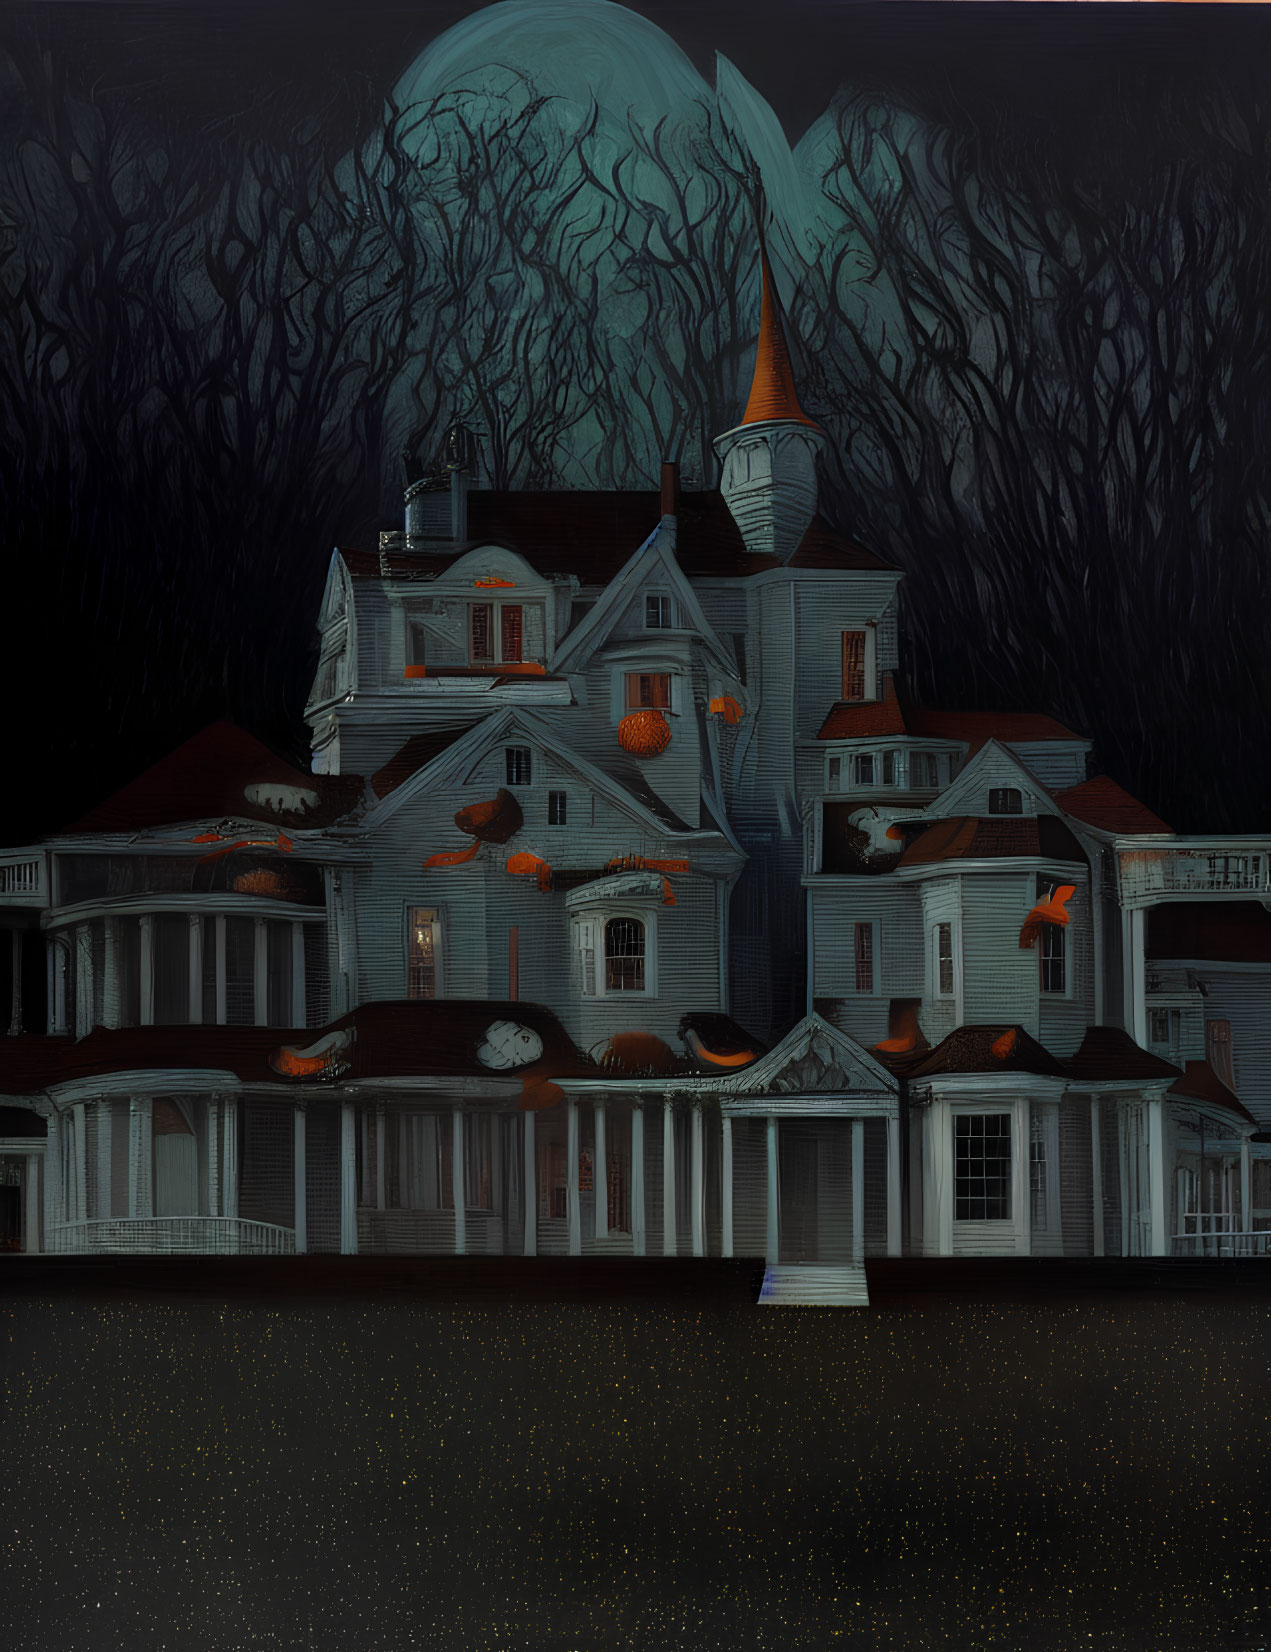 Spooky haunted house with glowing orange windows and spire on dark night landscape